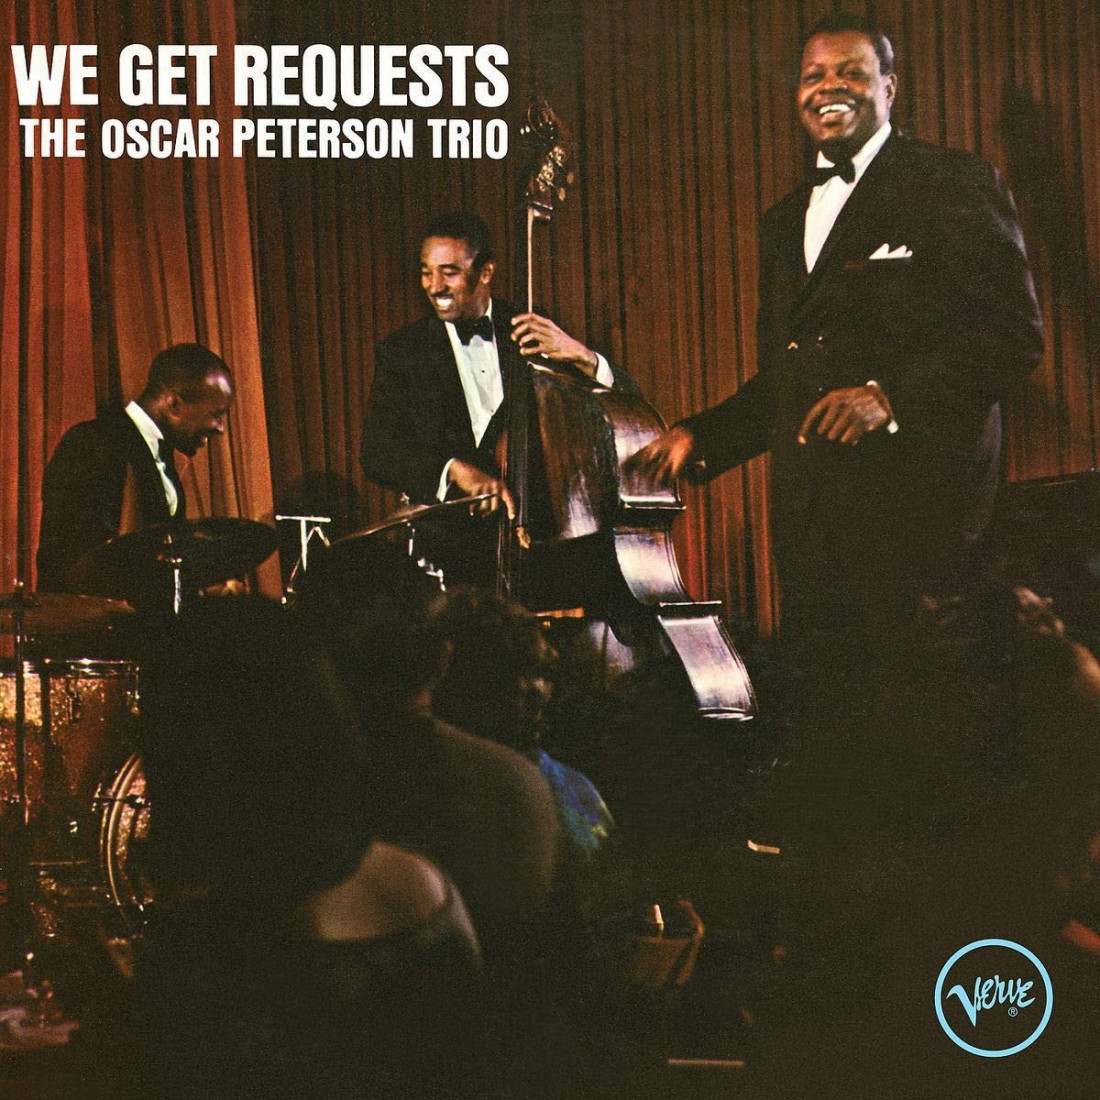 [Oscar Peterson Trio] You Look Good to Me (We Get Requests-1964) Photo-Image